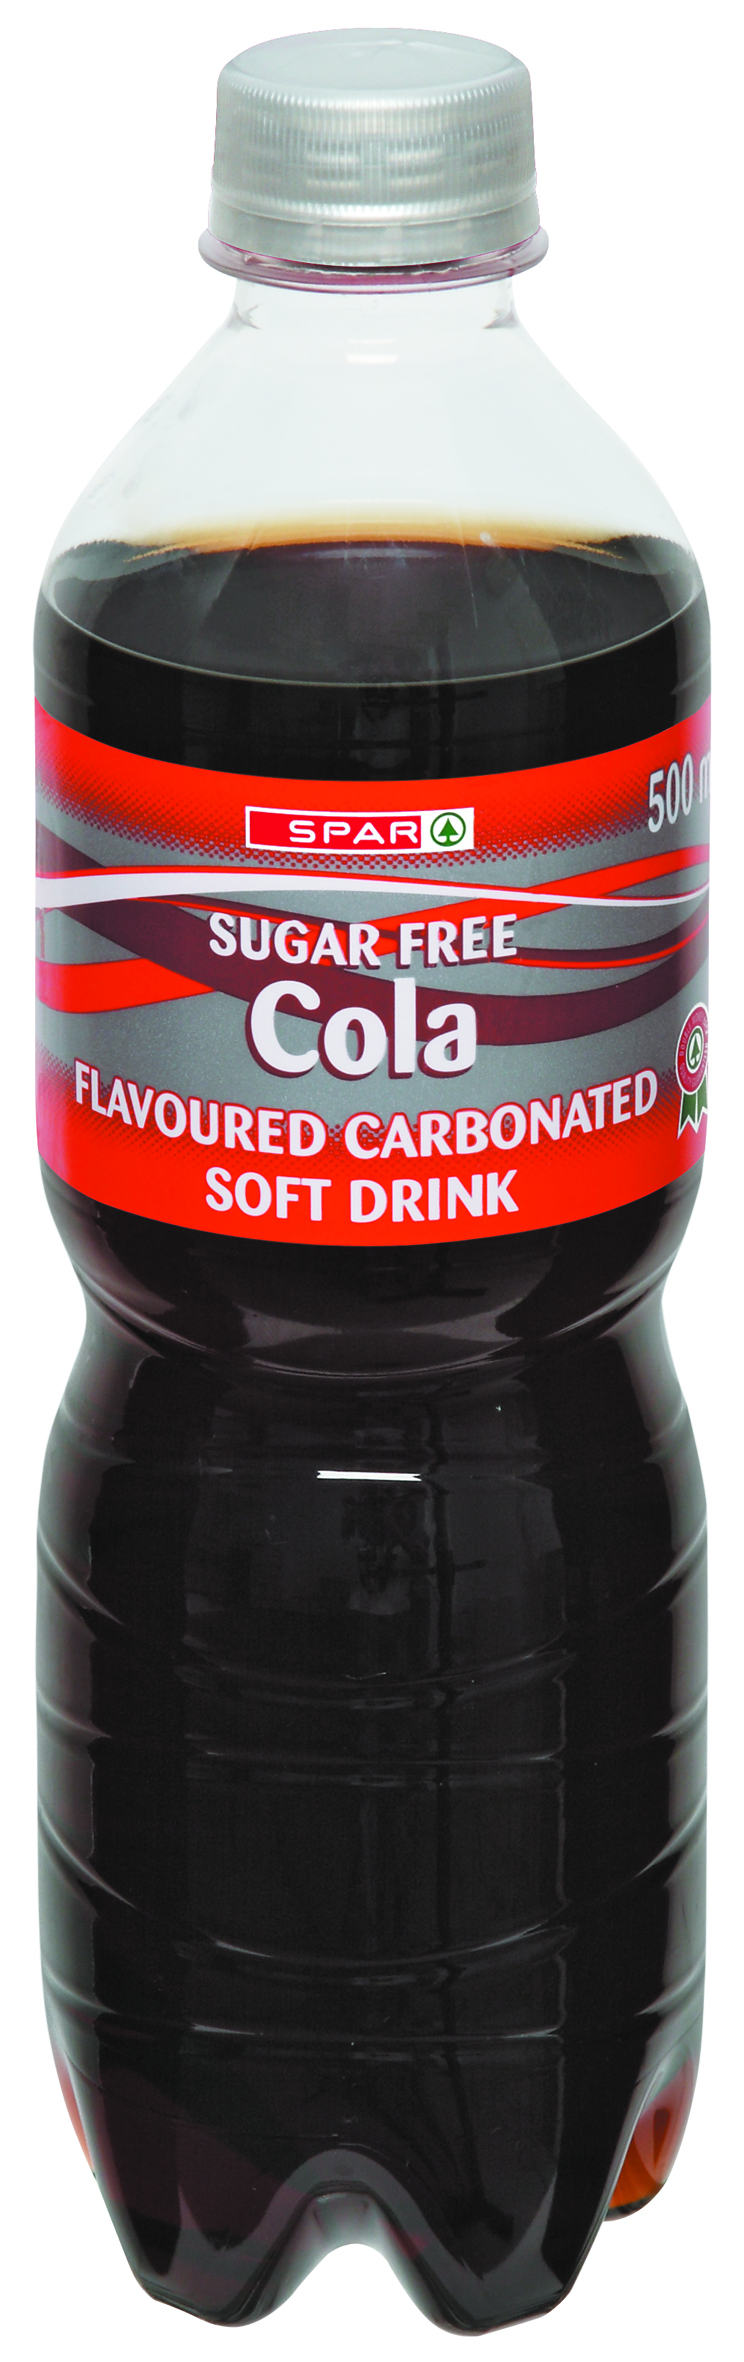 carbonated soft drink sugar free cola flavoured